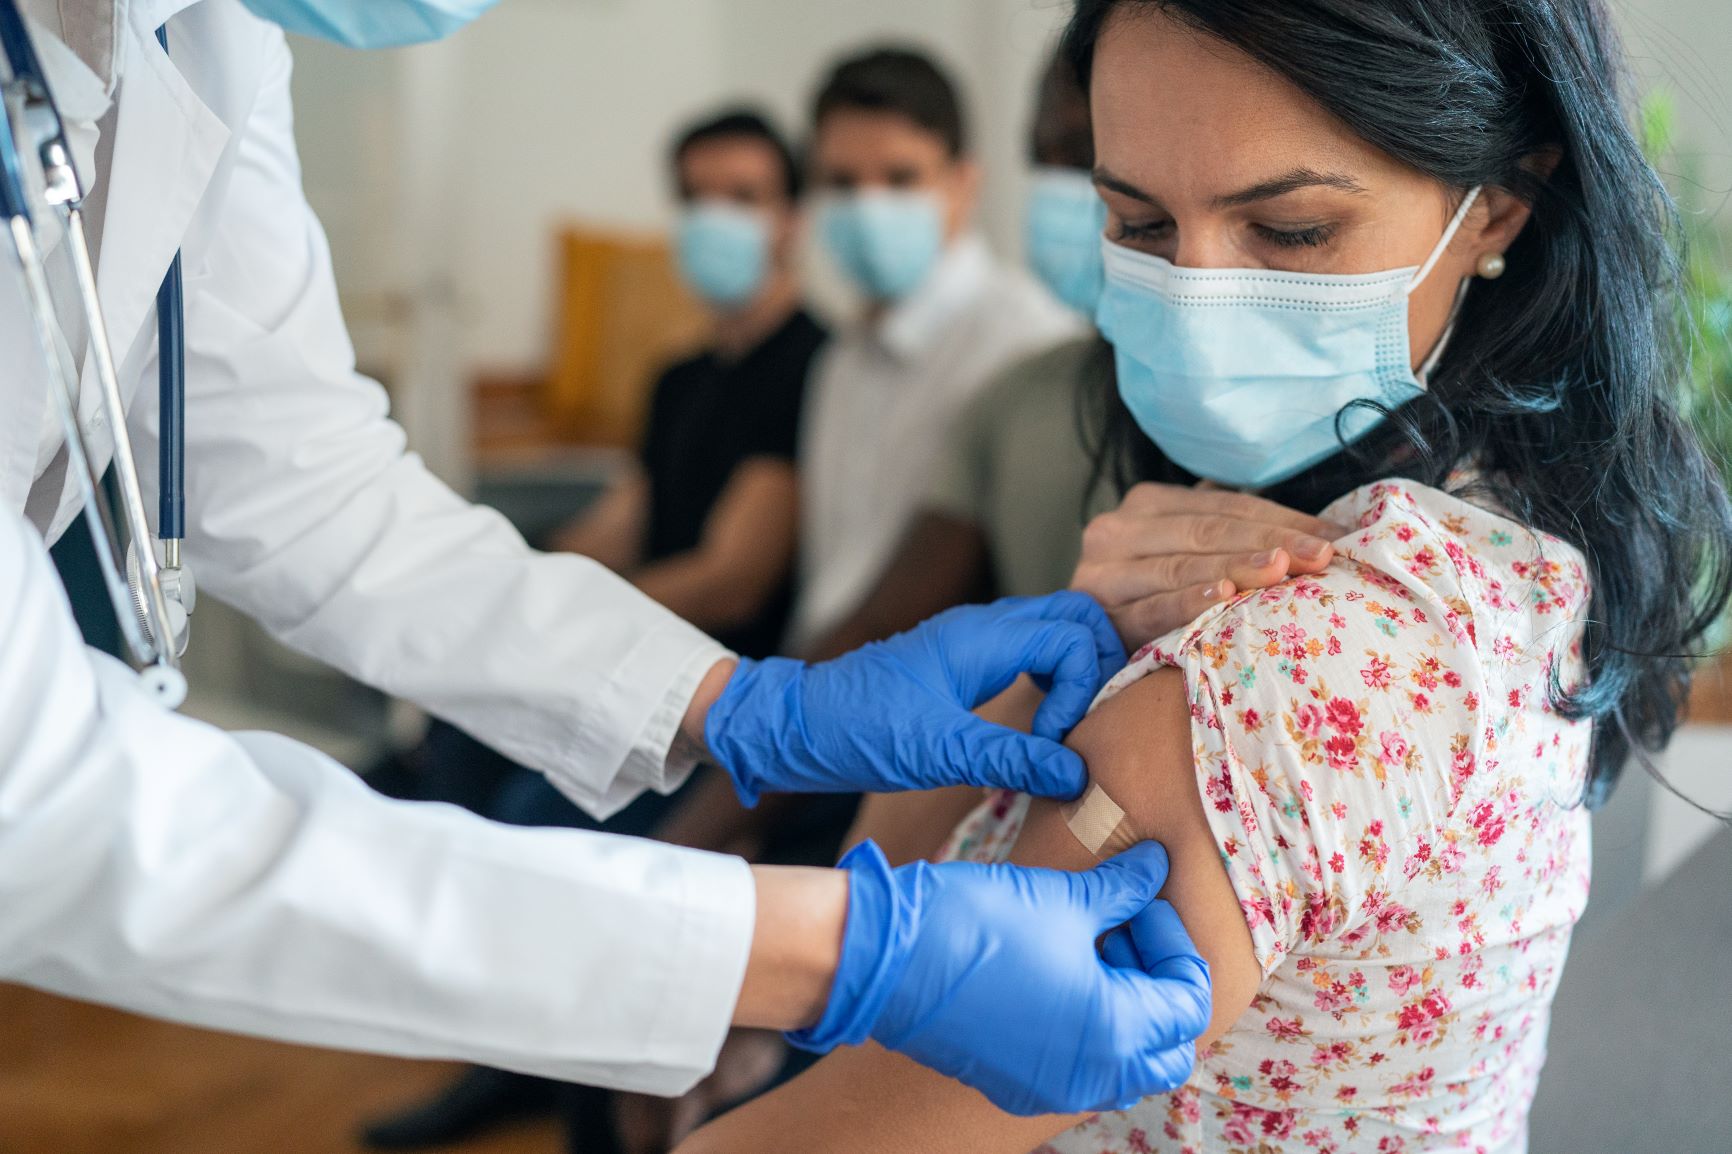 Pharmacist with blue gloves putting a band-aid on patient's arm after administering COVID treatment